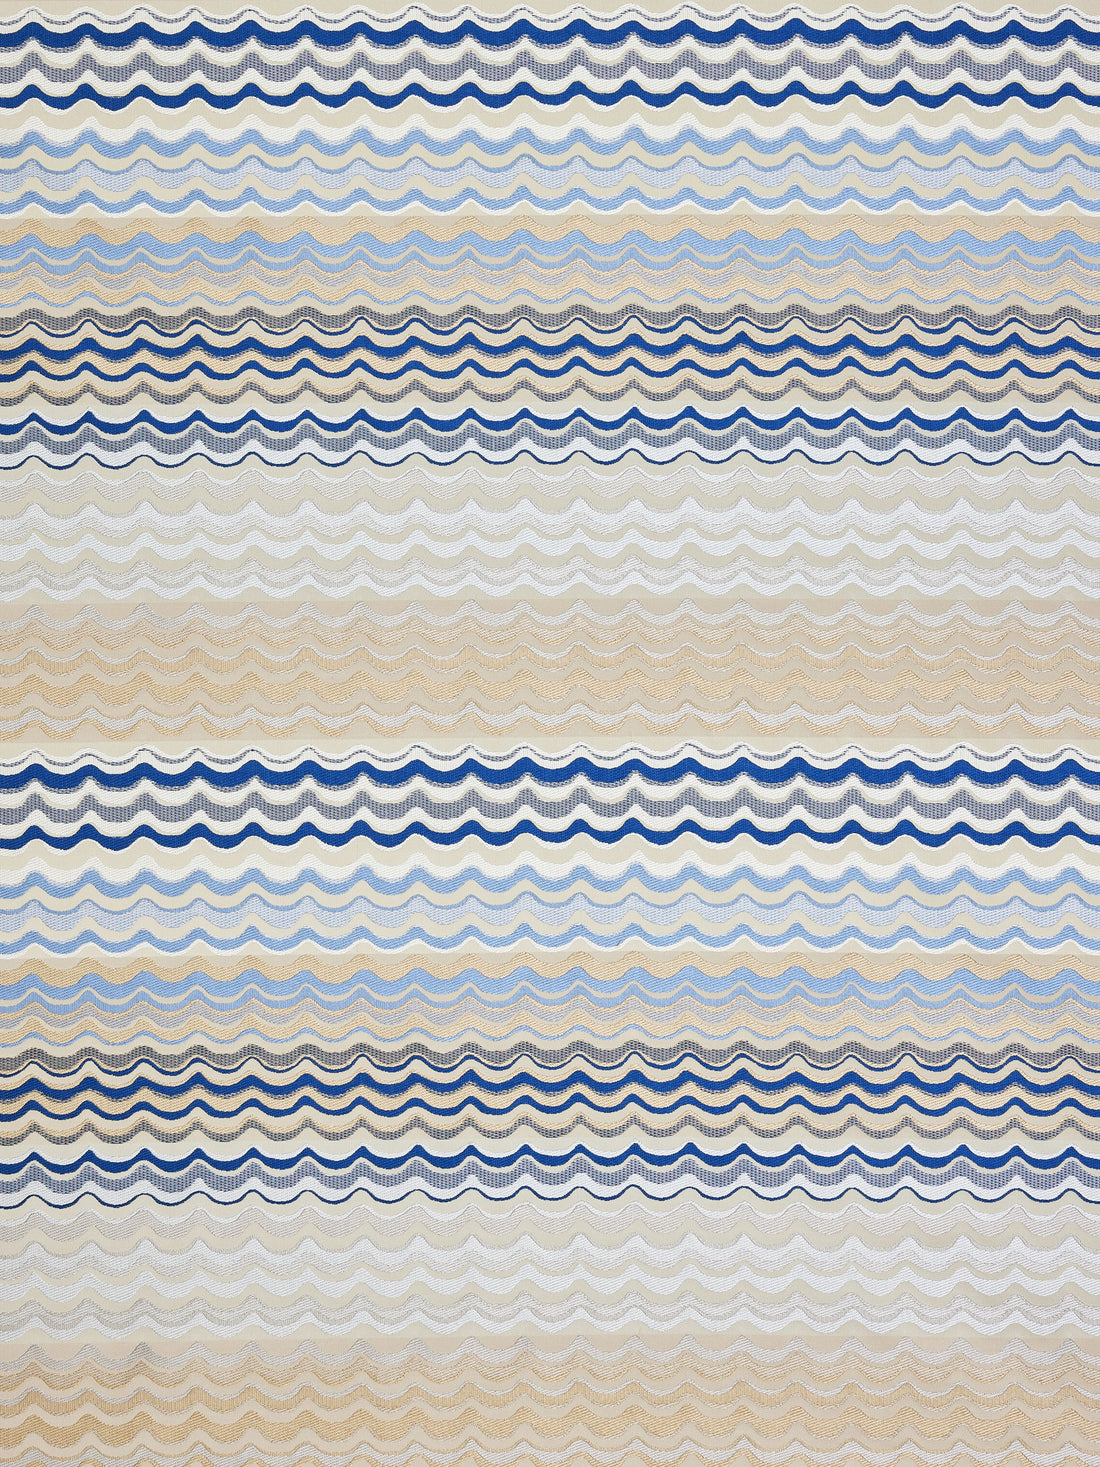 New Wave fabric in sapphire color - pattern number AB 00066512 - by Scalamandre in the Old World Weavers collection